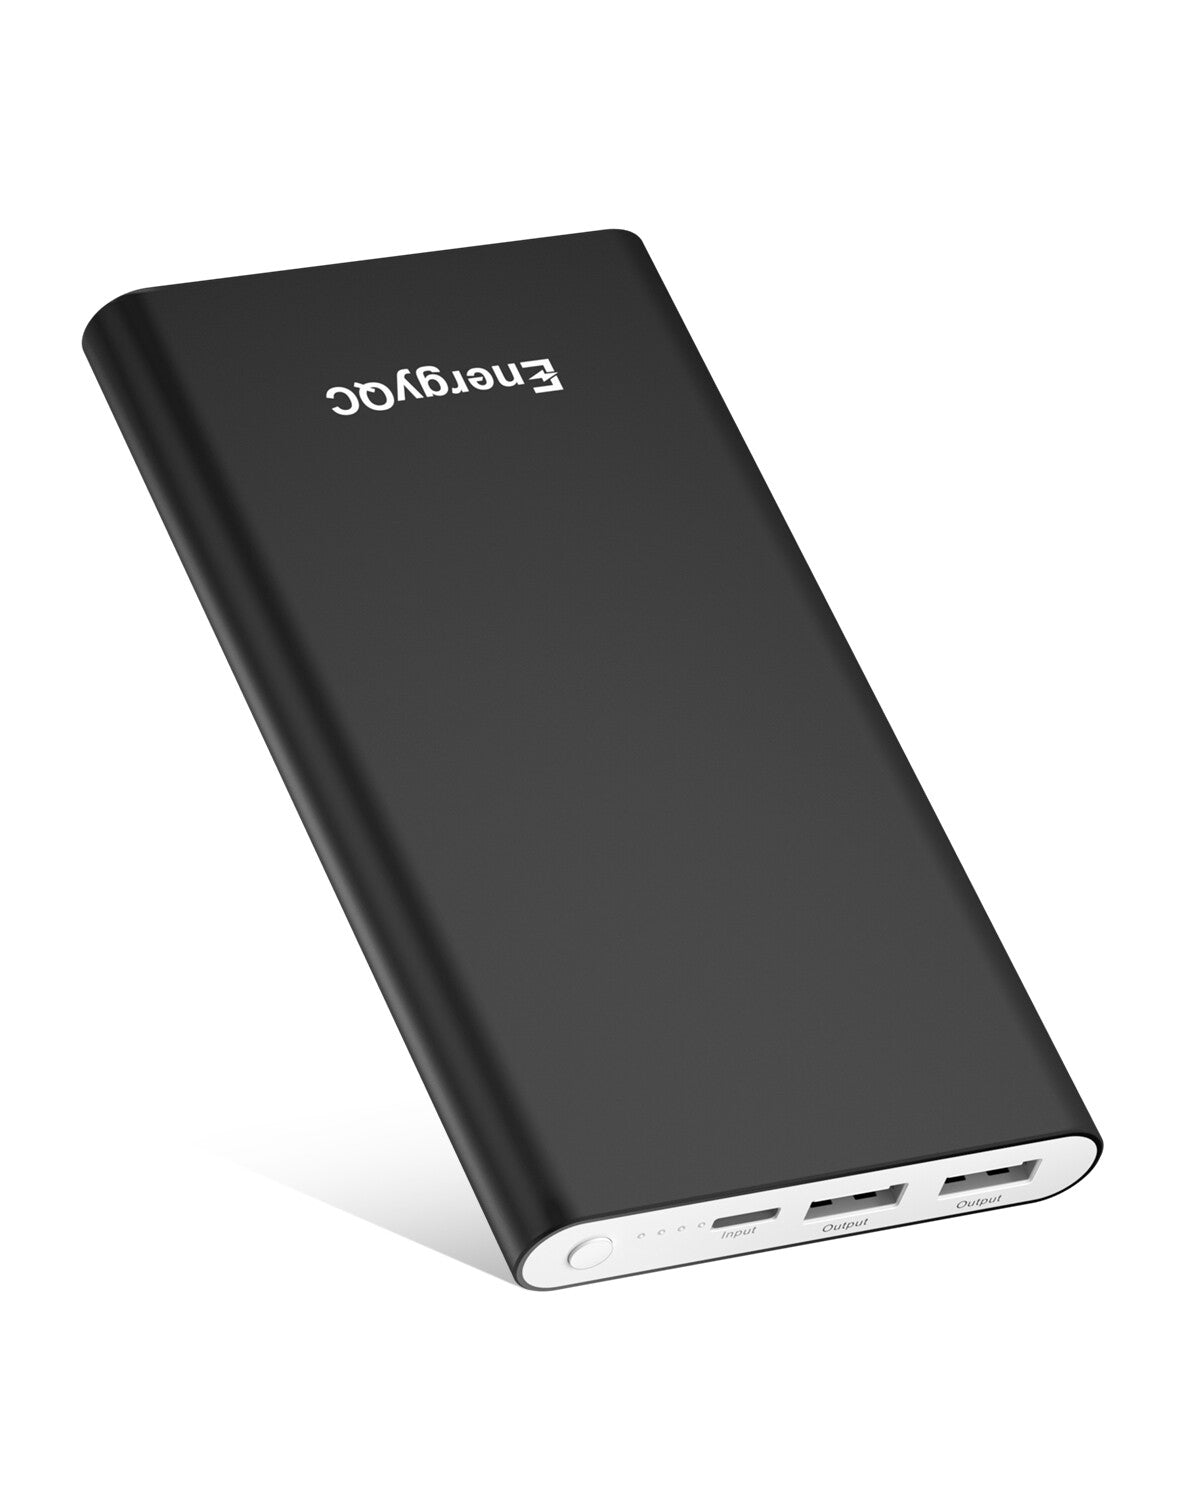 EnergyQC Pilot 4GS Portable Charger, Fast Charging 12000mAh Power Bank Dual 3A High Speed Output External Battery Pack Compatible with iPhone 13/12/11/X Samsung S10 and More